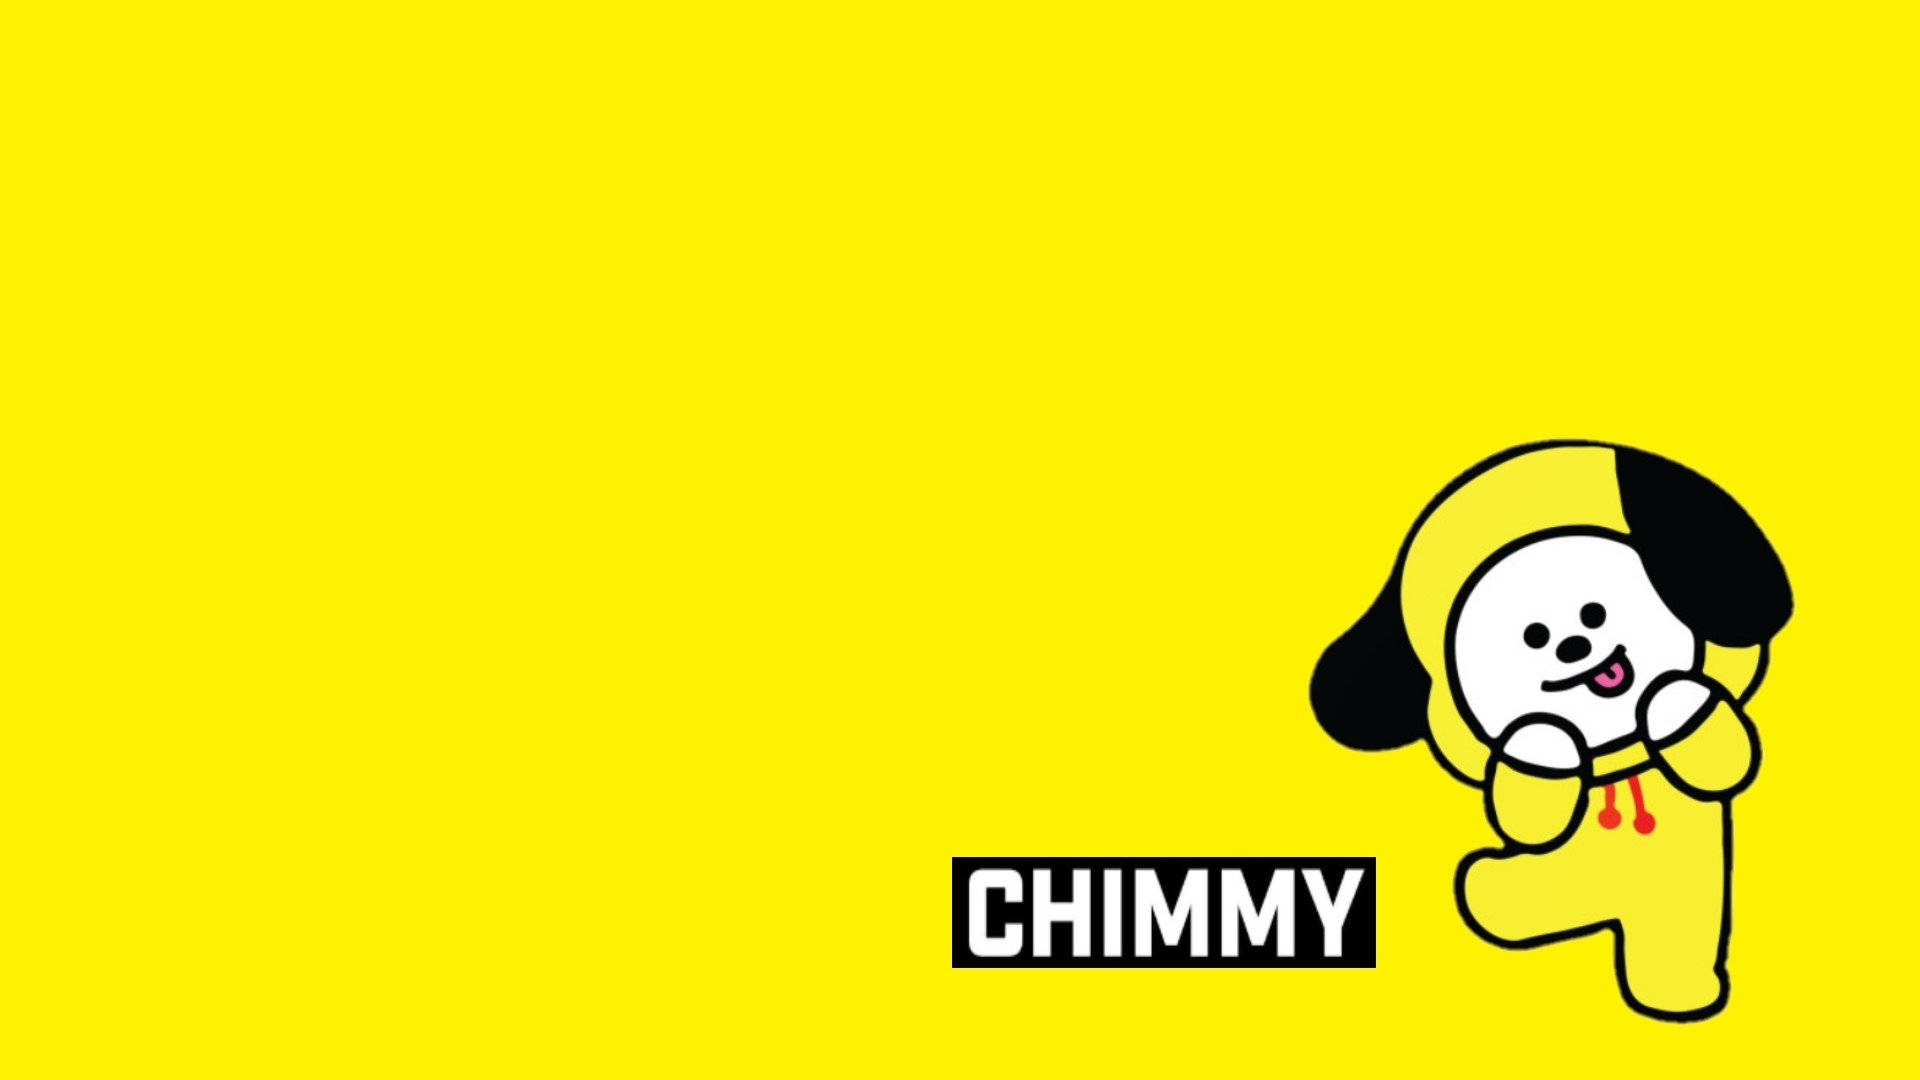 Chimmy Bt21 Character In Yellow Background